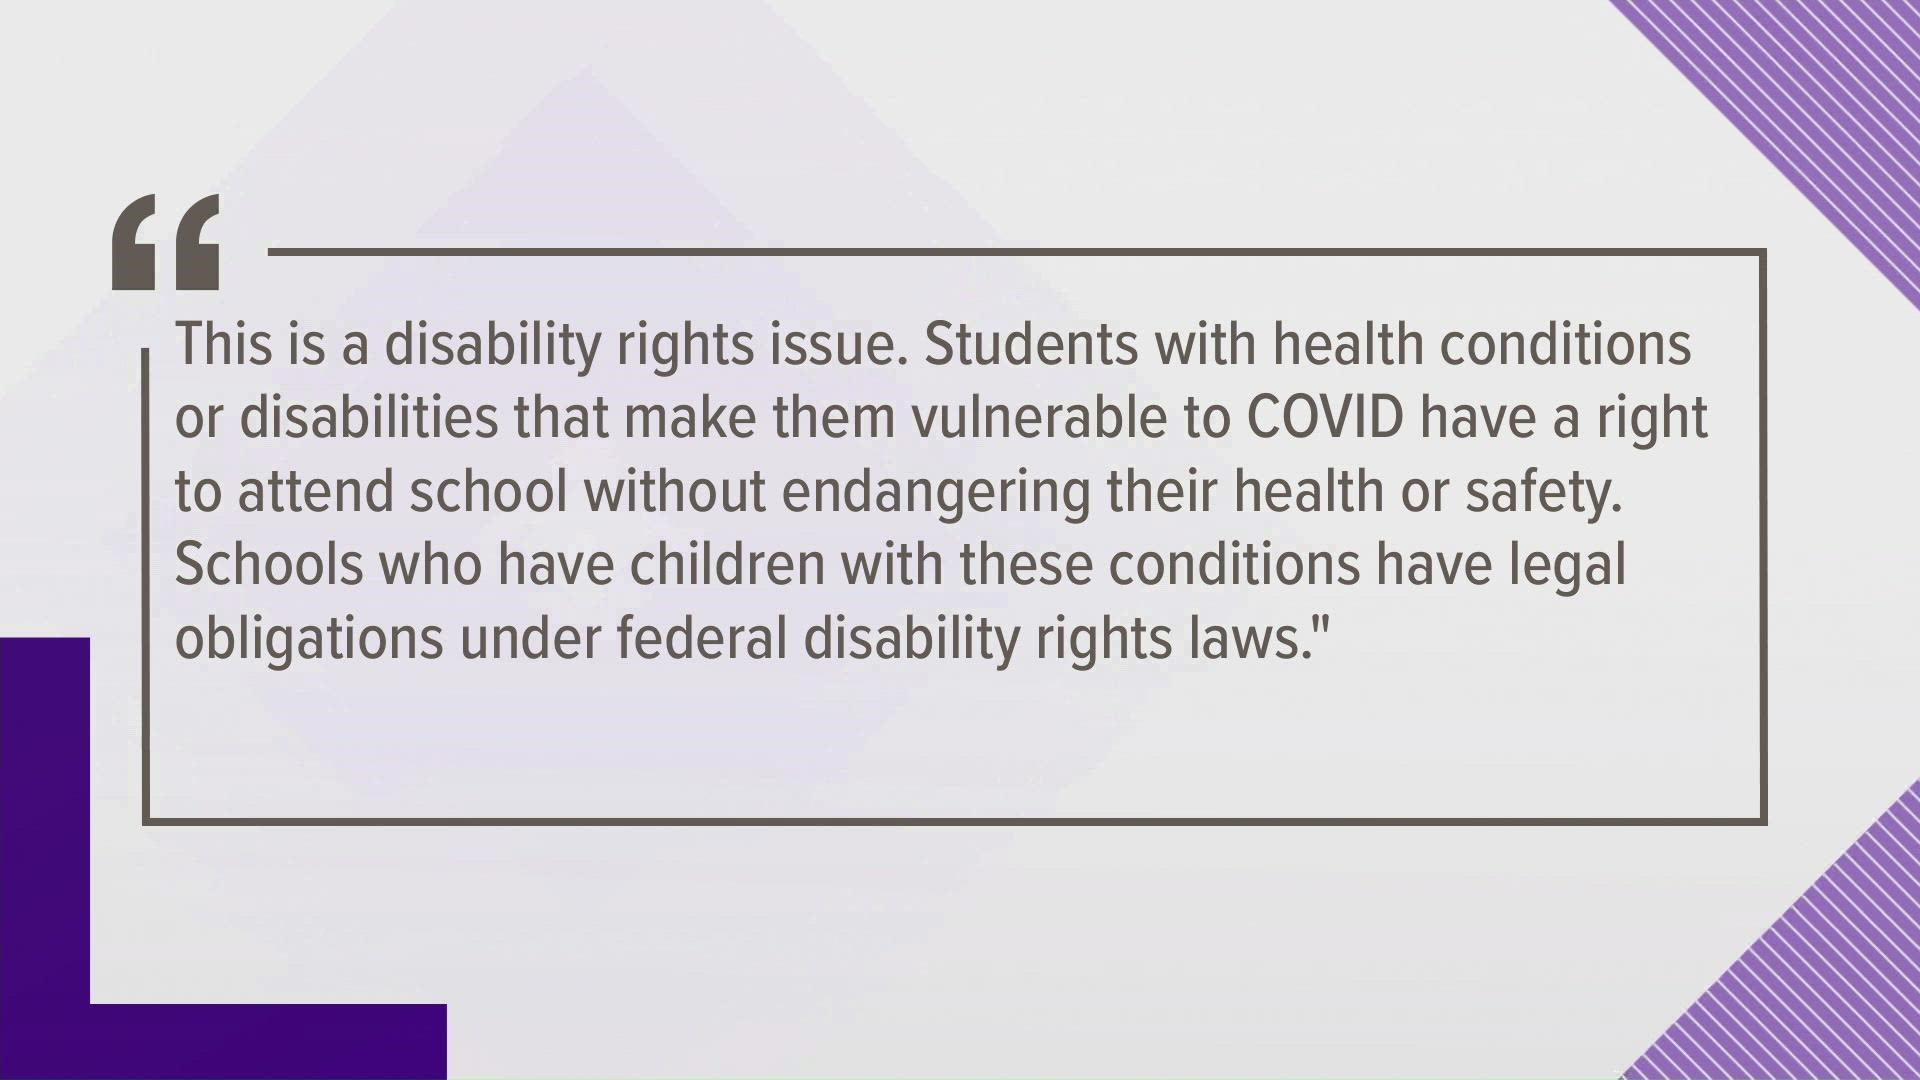 The lawsuit says the ban disproportionately impacts students with underlying health conditions or disabilities who may be exposed to COVID-19